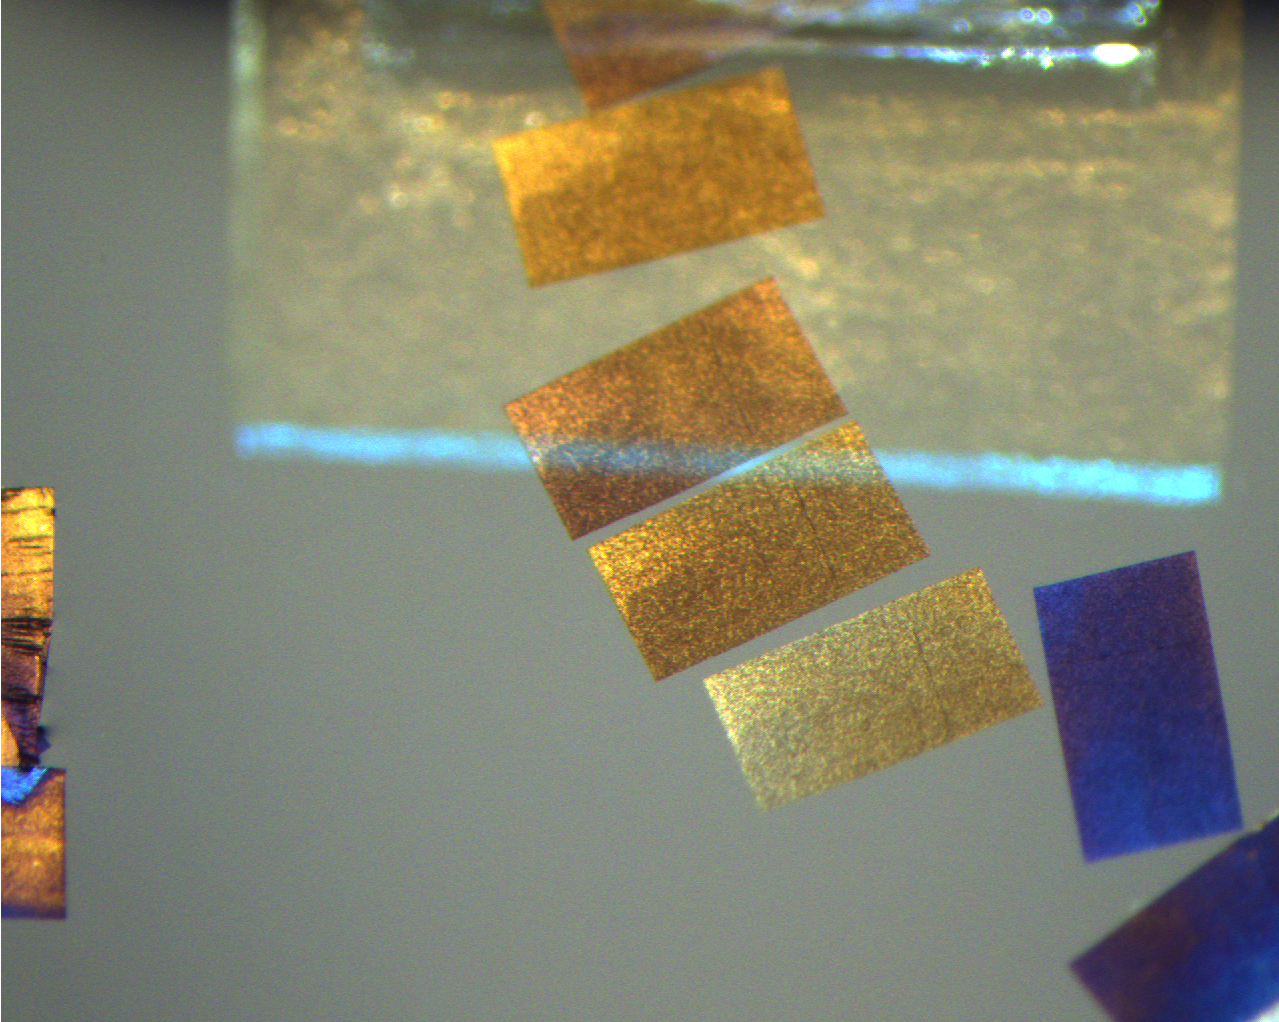 Ultrathin sections of a polymer composite material floated on water.